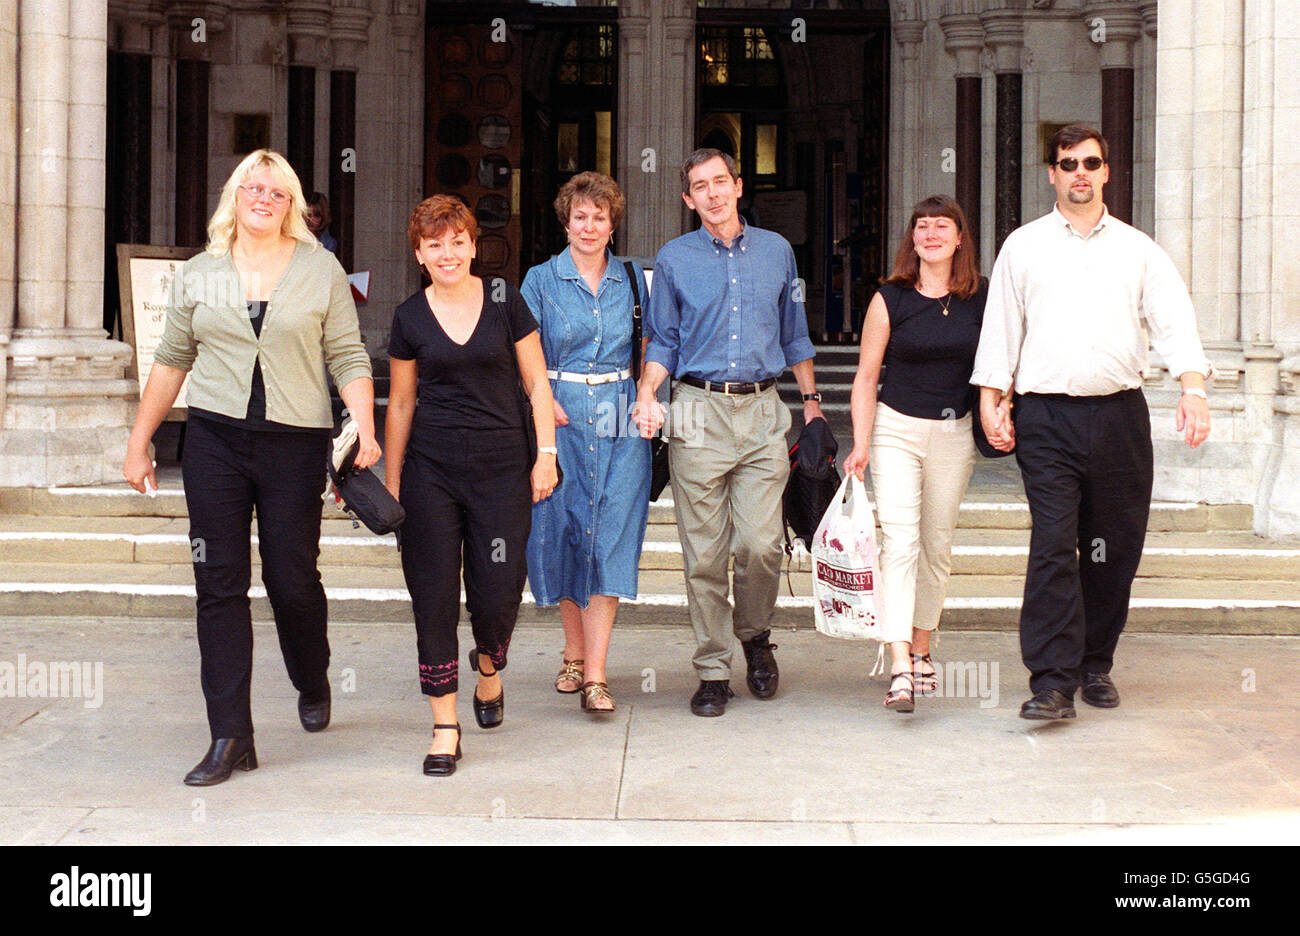 (L-R) Lisa Mifflin, Sharon Lewis, Alison and husband Andrew Pearce and Jane and husband Lee Rimell - some of the parents of the four children caught up in a legal row over a local education authority's admissions policy - were celebrating , at the High Court, London. *...after a court ruled they should be allowed into the same school as their older brothers and sisters. A High Court judge in London rejected a challenge by South Gloucestershire Council to an independent appeals panel's decision in favour of the parents. The council - which may yet seek to take the case to the Court of Appeal Stock Photo